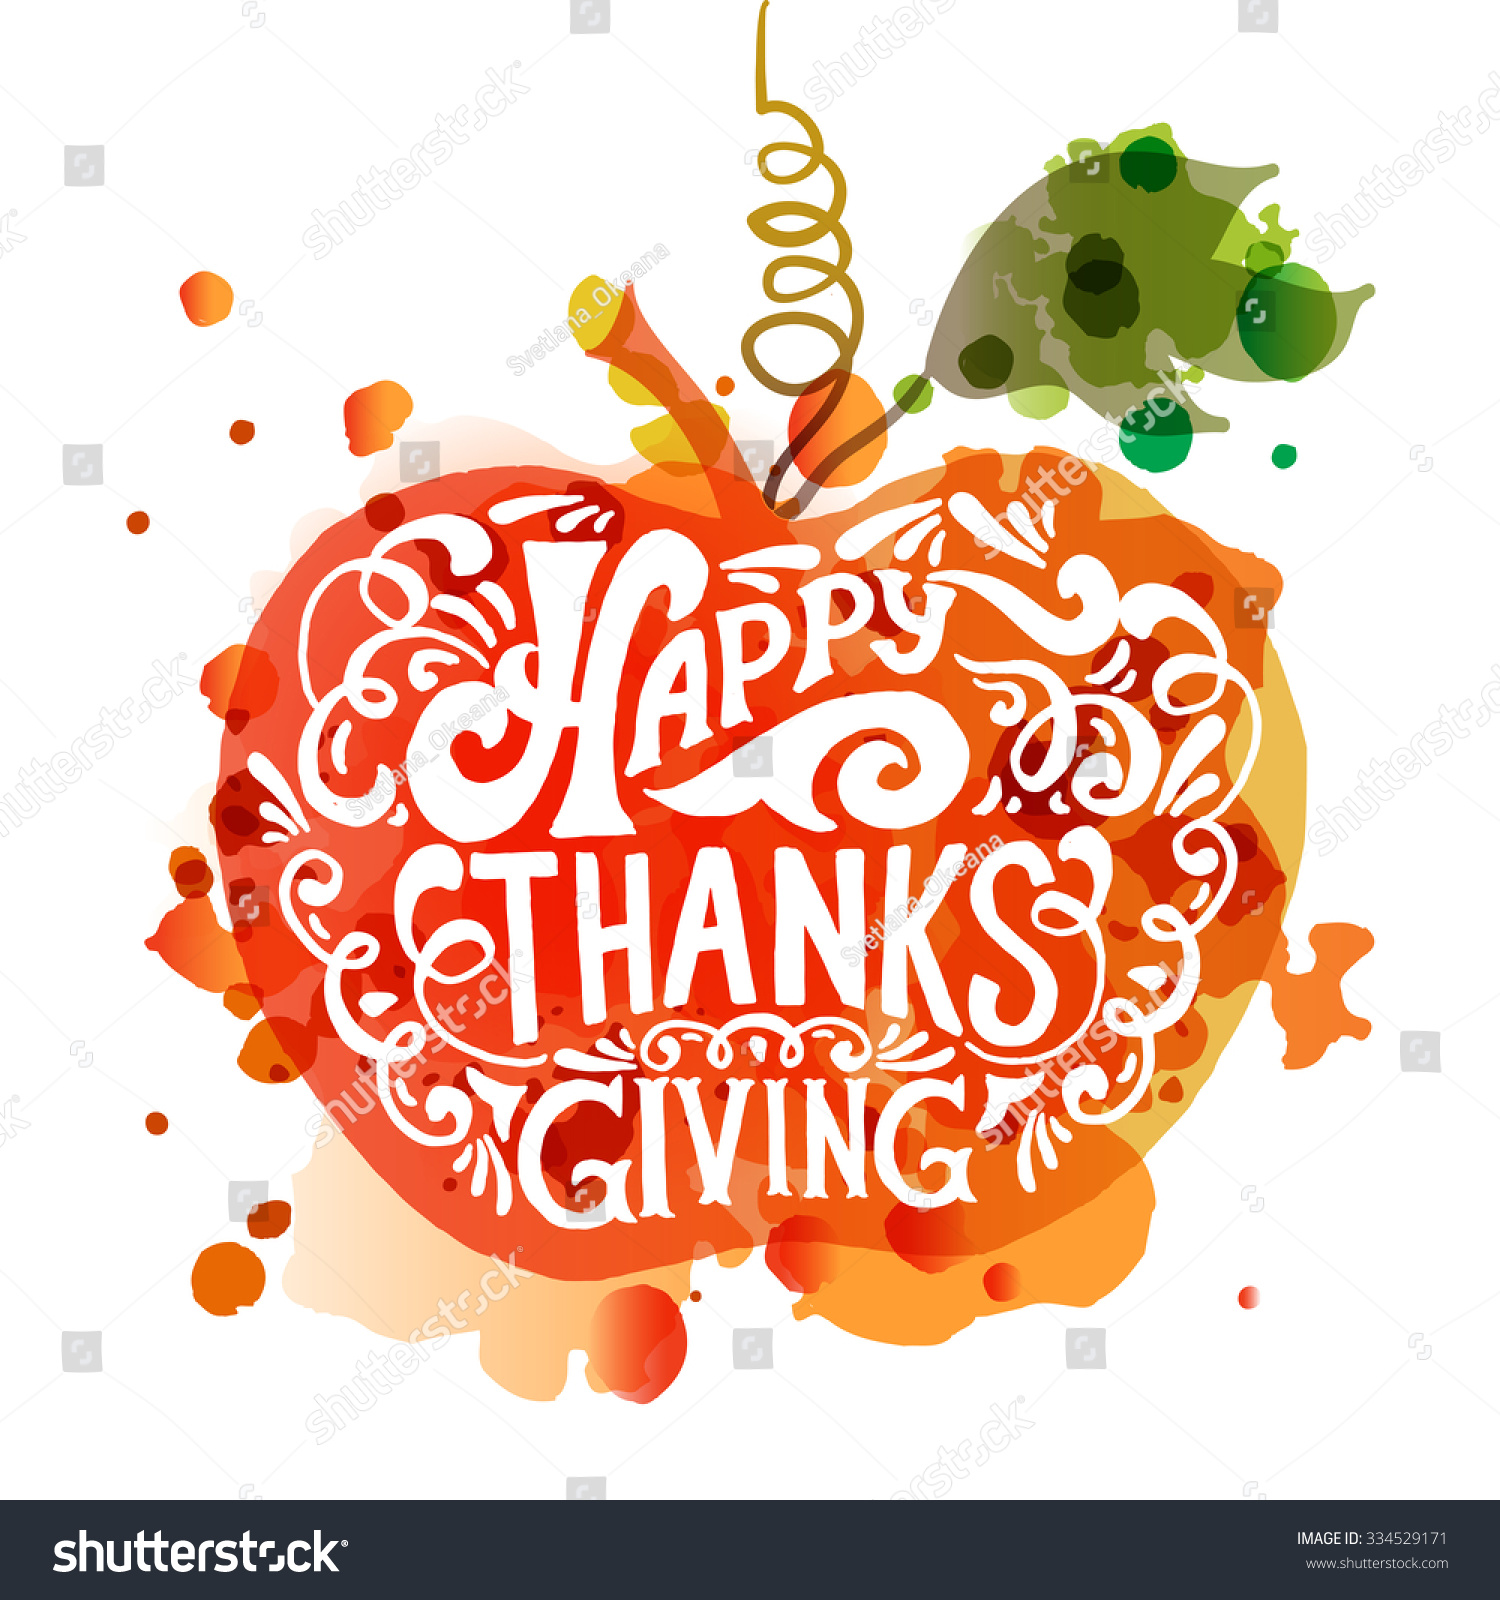 thanksgiving email clipart - photo #29